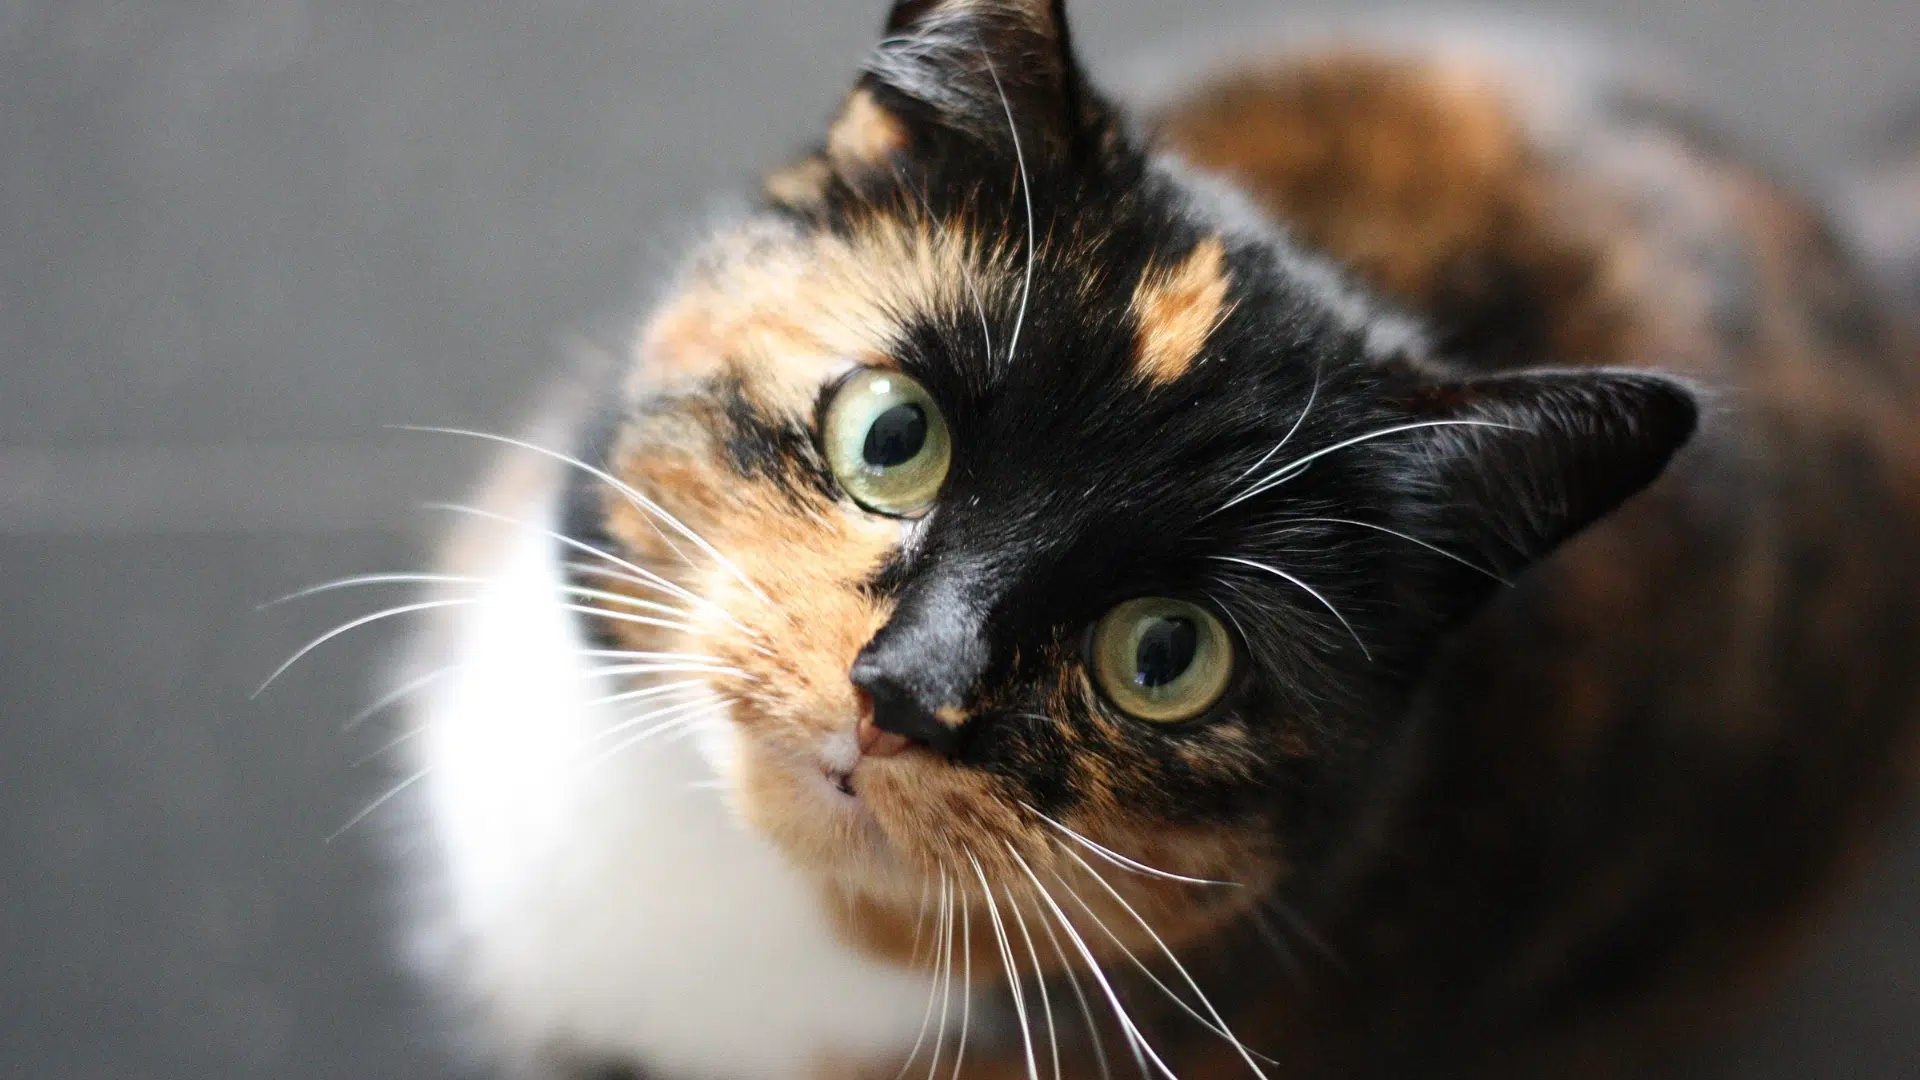 Georgetown Animal Shelter Announces Dates for Free Cat Spay/Neuter Clinics  | Hello Georgetown